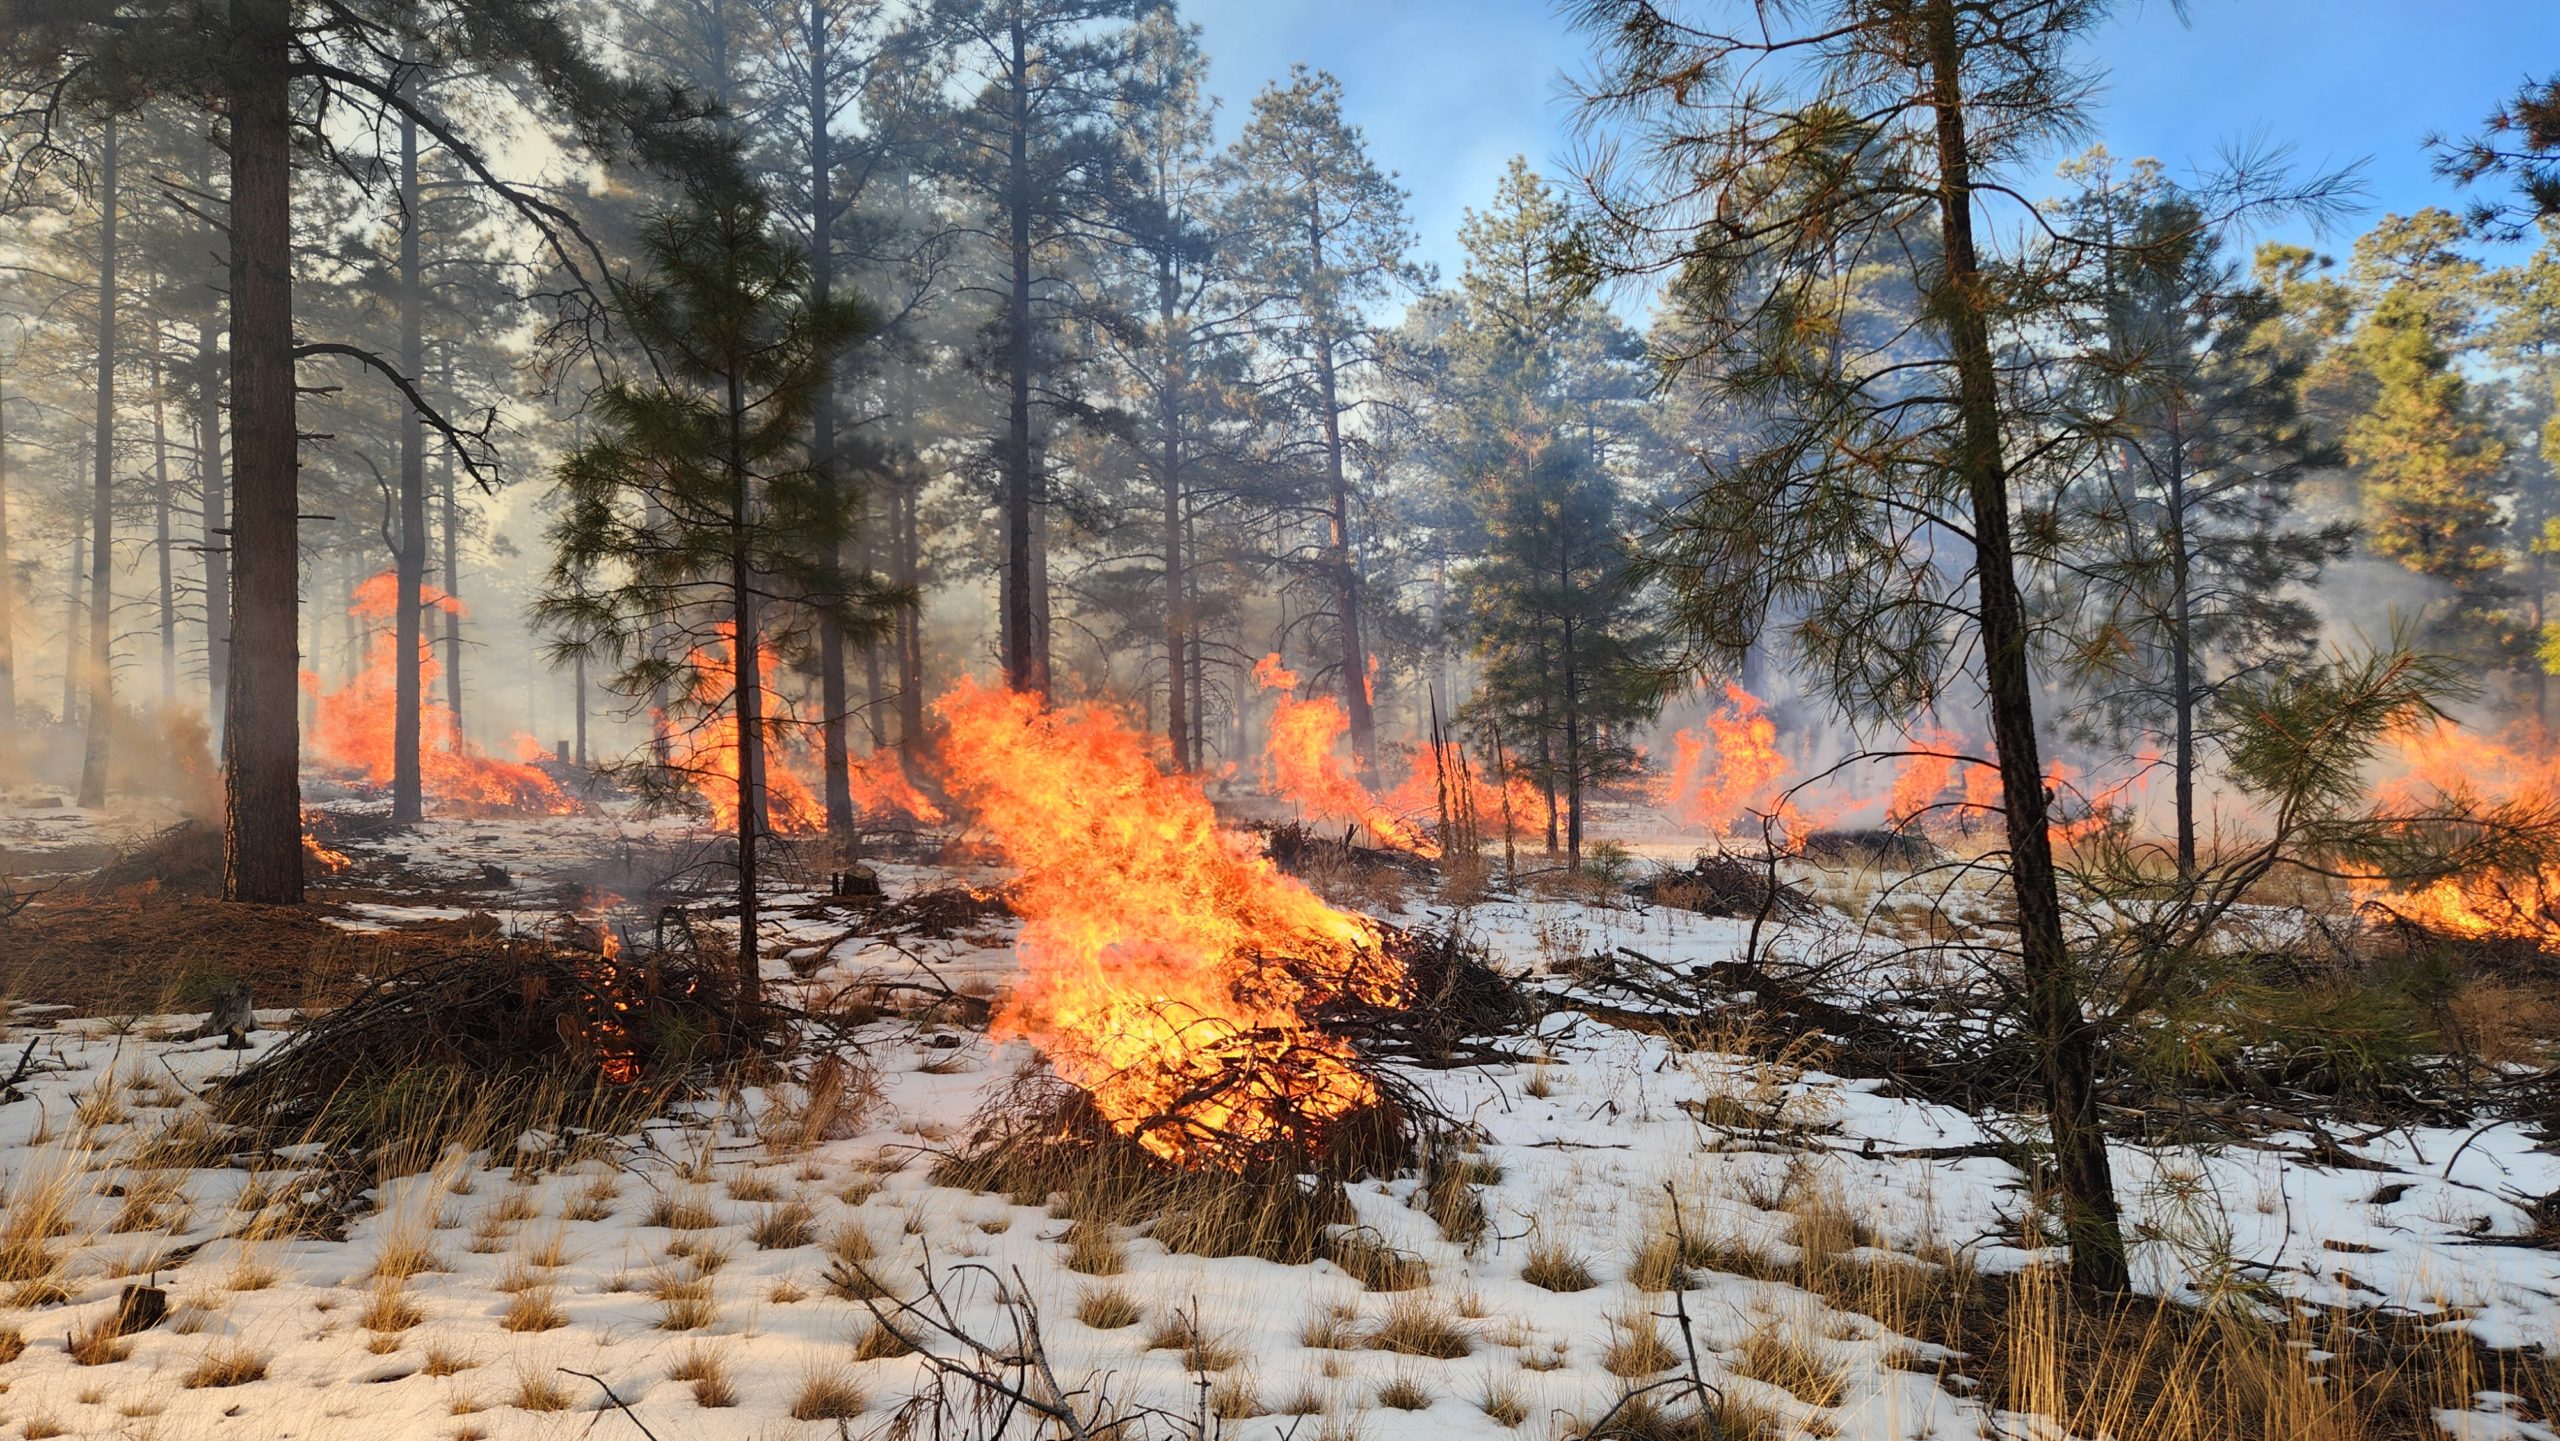 Photo of brush piles being burned to reduce fuel loads in the forest.